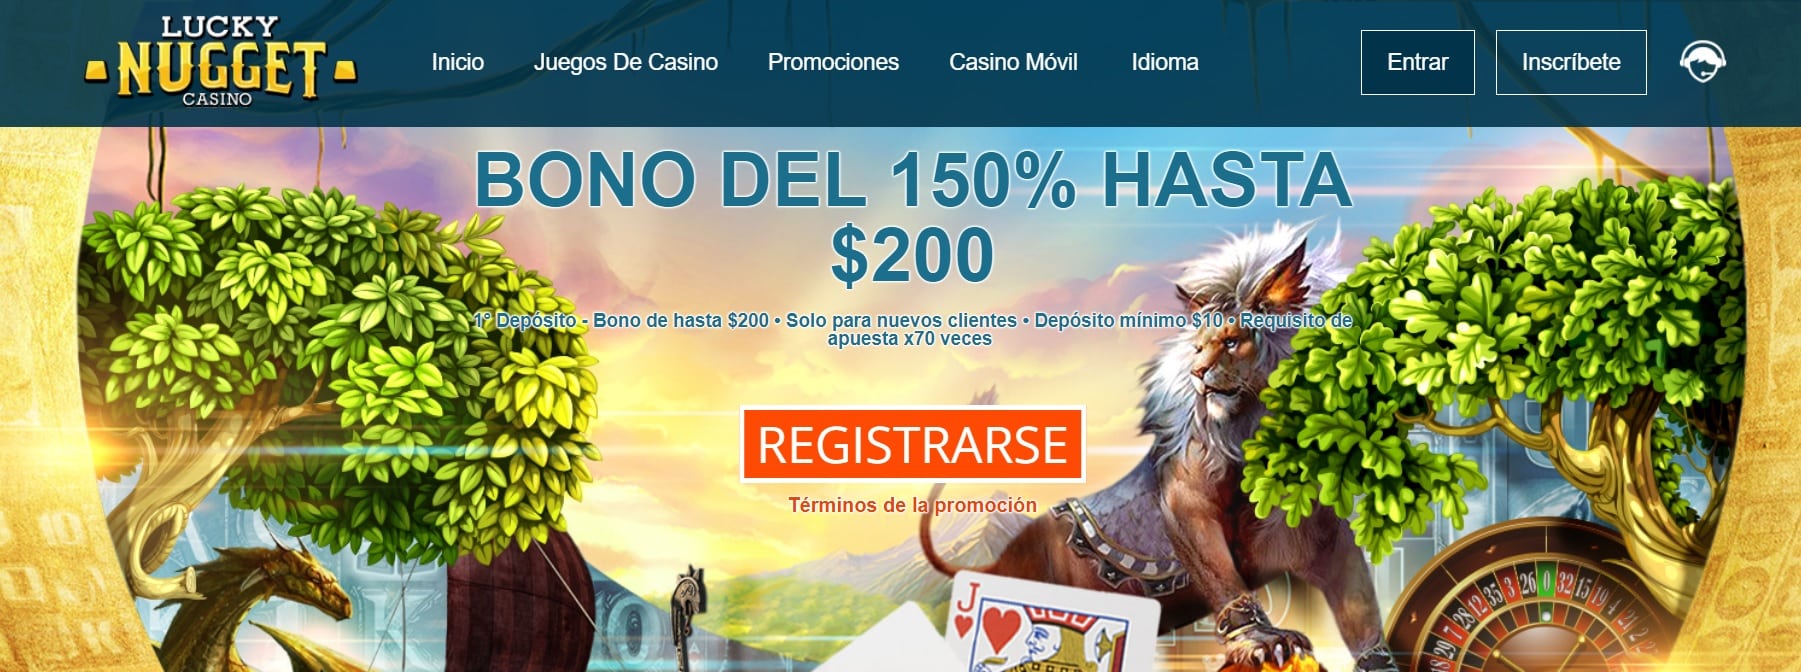 casino online lucky nugget chile